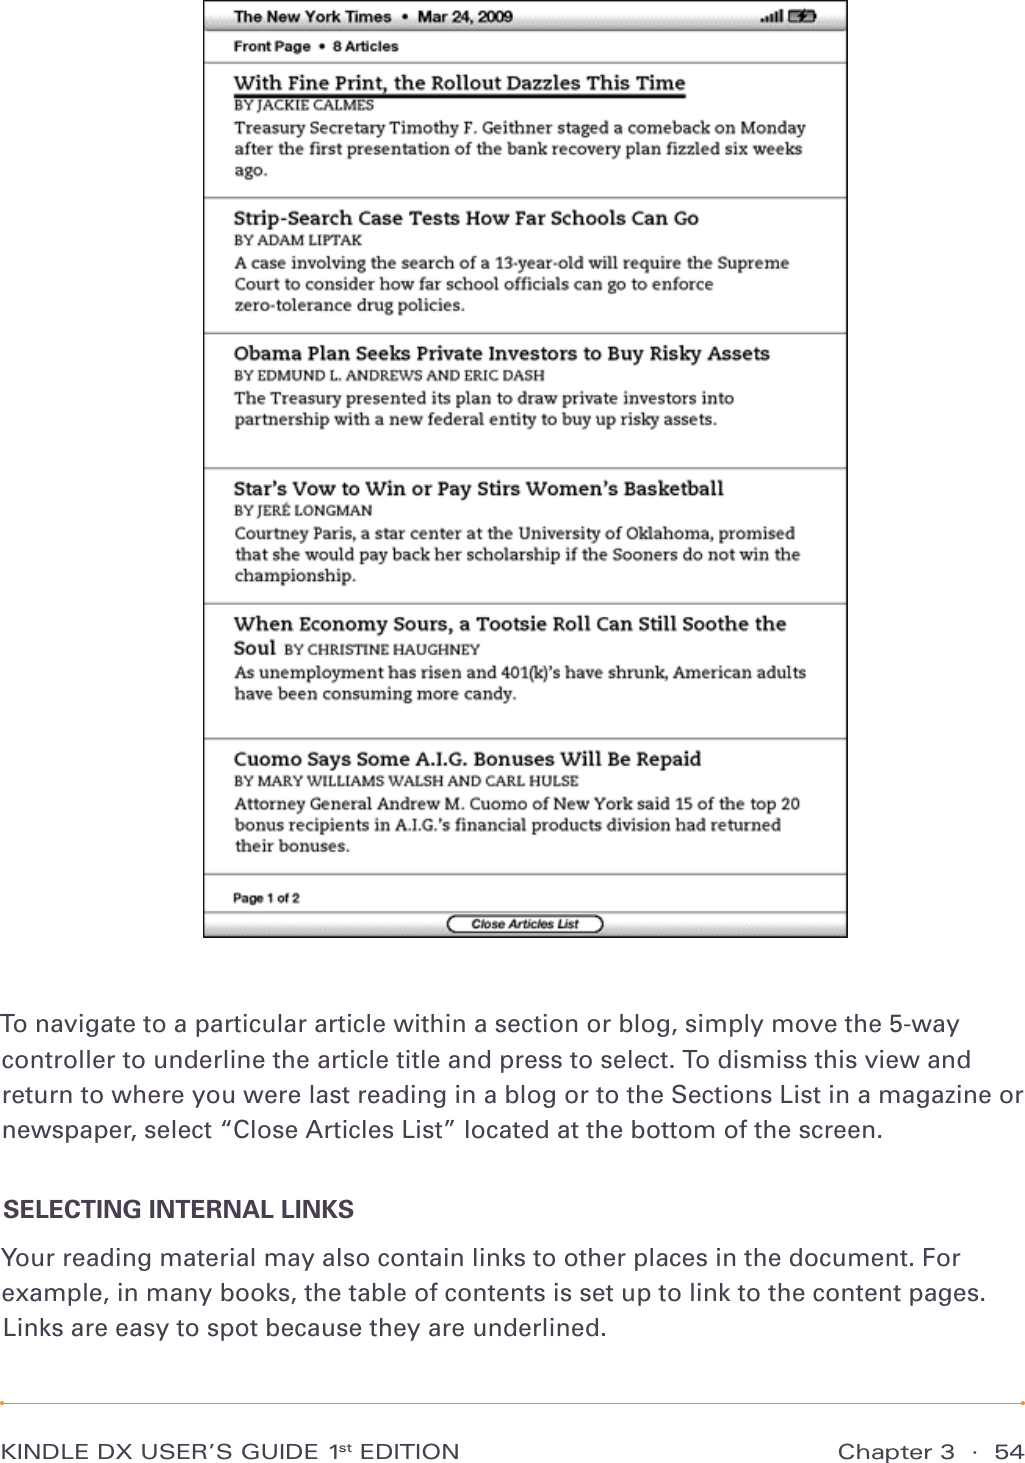 KINDLE DX USER’S GUIDE 1st EDITION Chapter 3  ·  54To navigate to a particular article within a section or blog, simply move the 5-way controller to underline the article title and press to select. To dismiss this view and return to where you were last reading in a blog or to the Sections List in a magazine or newspaper, select “Close Articles List” located at the bottom of the screen.SELECTING INTERNAL LINKSYour reading material may also contain links to other places in the document. For example, in many books, the table of contents is set up to link to the content pages. Links are easy to spot because they are underlined. 